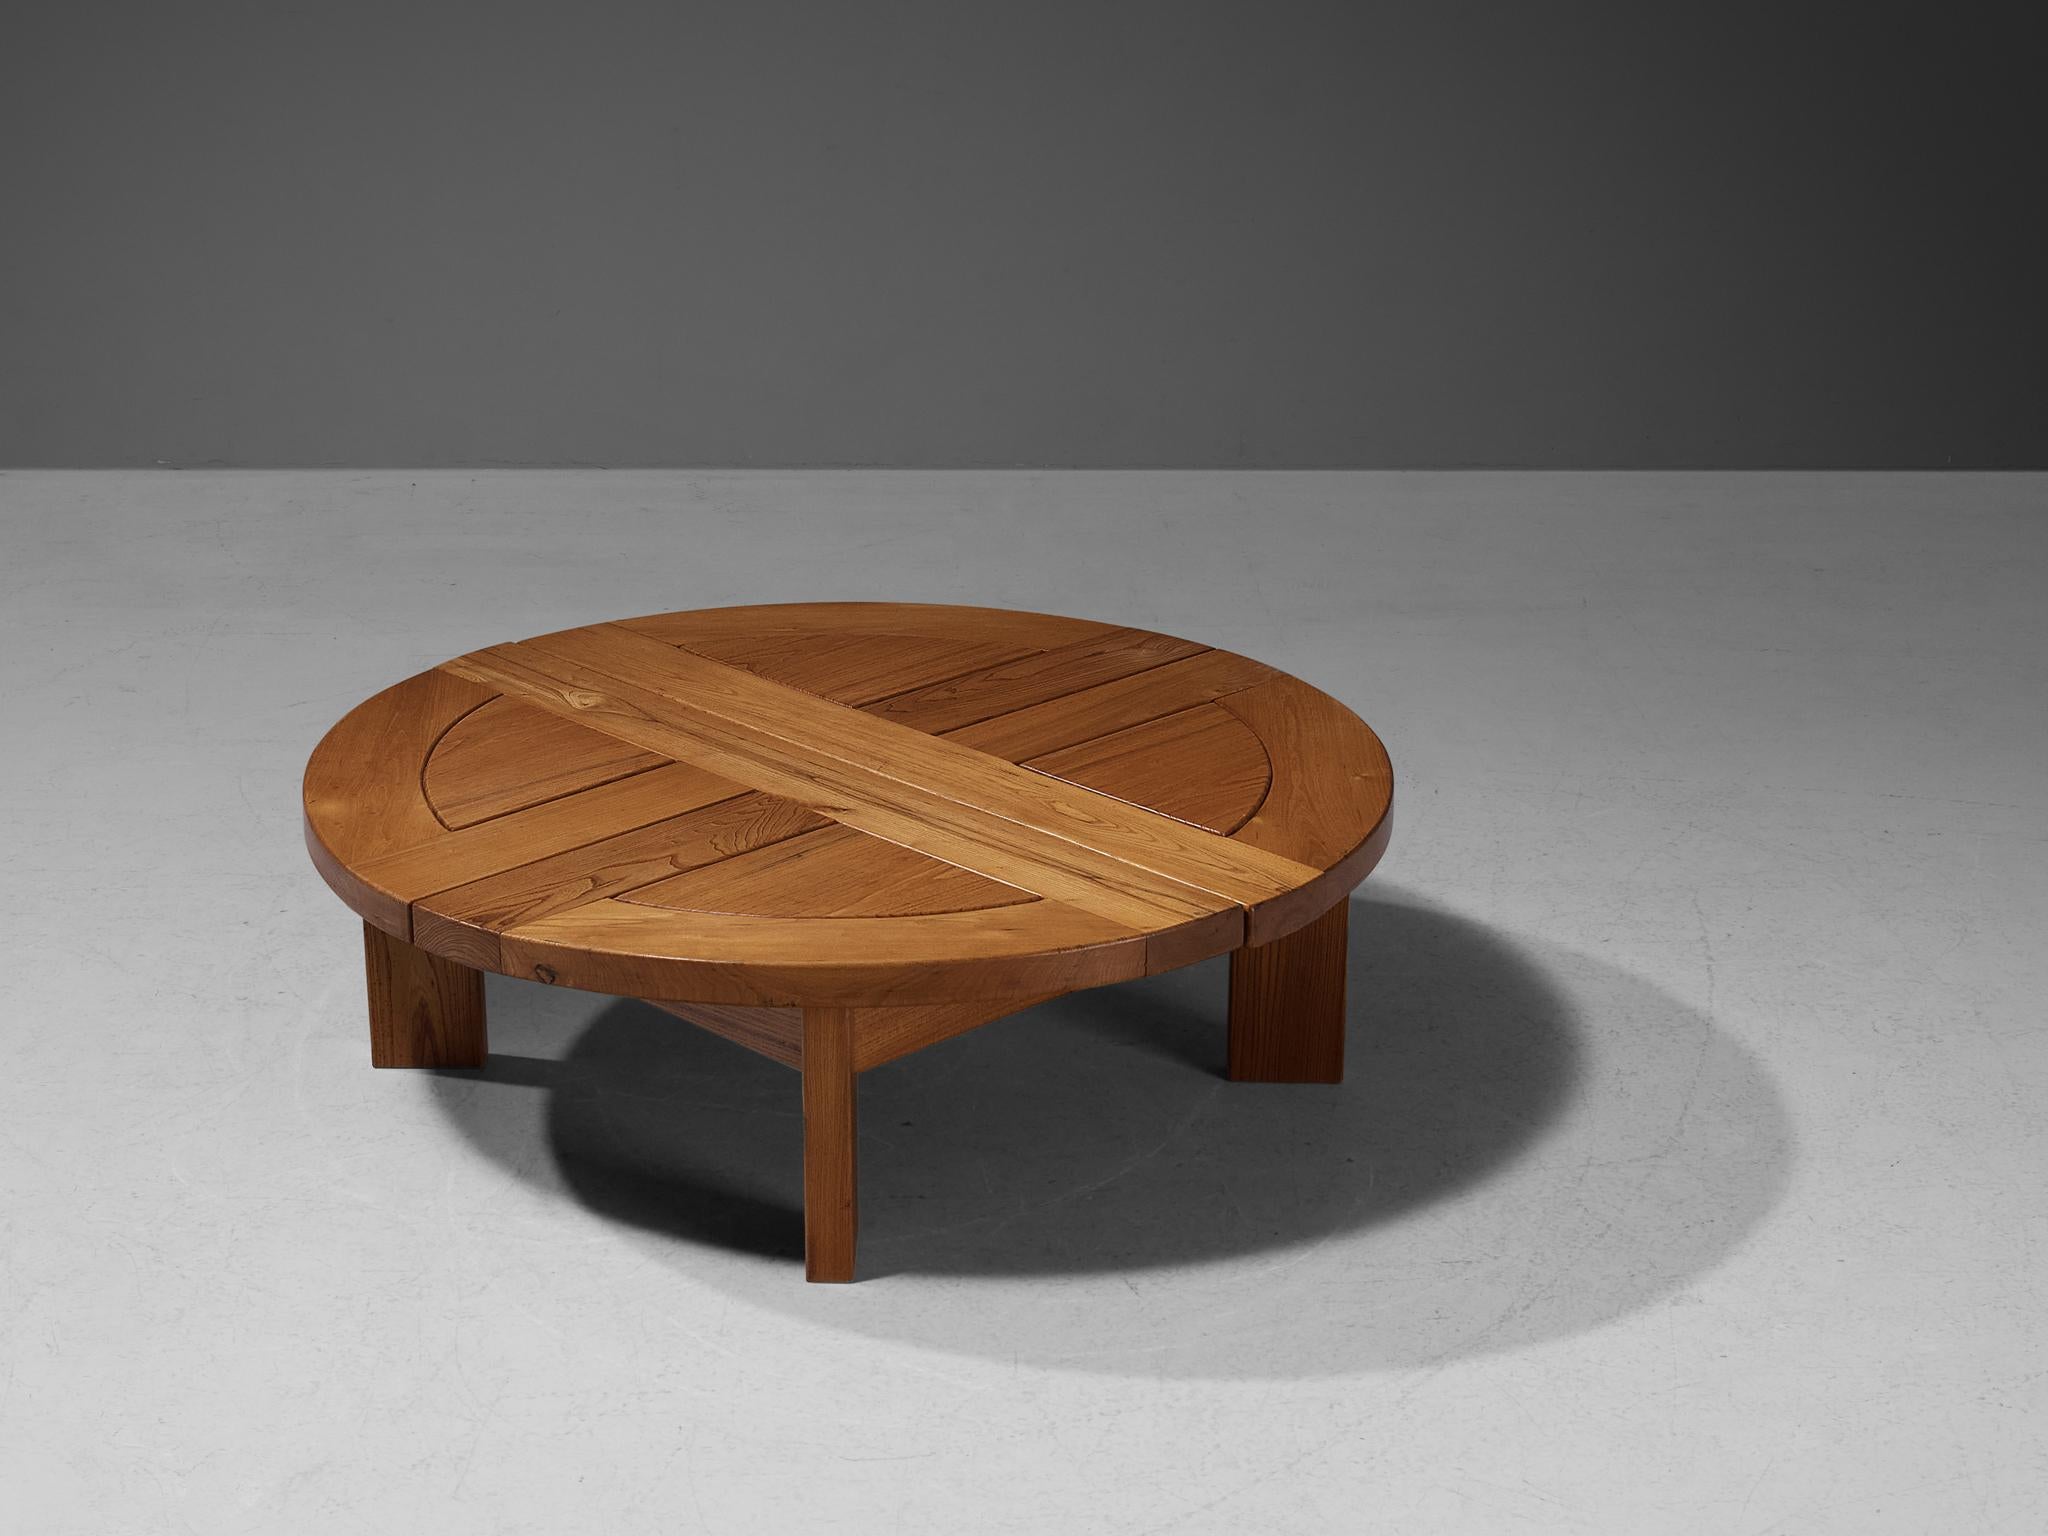 Maison Regain, coffee table, elm, France, 1970s.

Stunning French coffee table executed in a rich and beautifully colored elm, designed by Maison Regain. The table is sturdy and combines a simplified yet complex design with nifty, solid construction